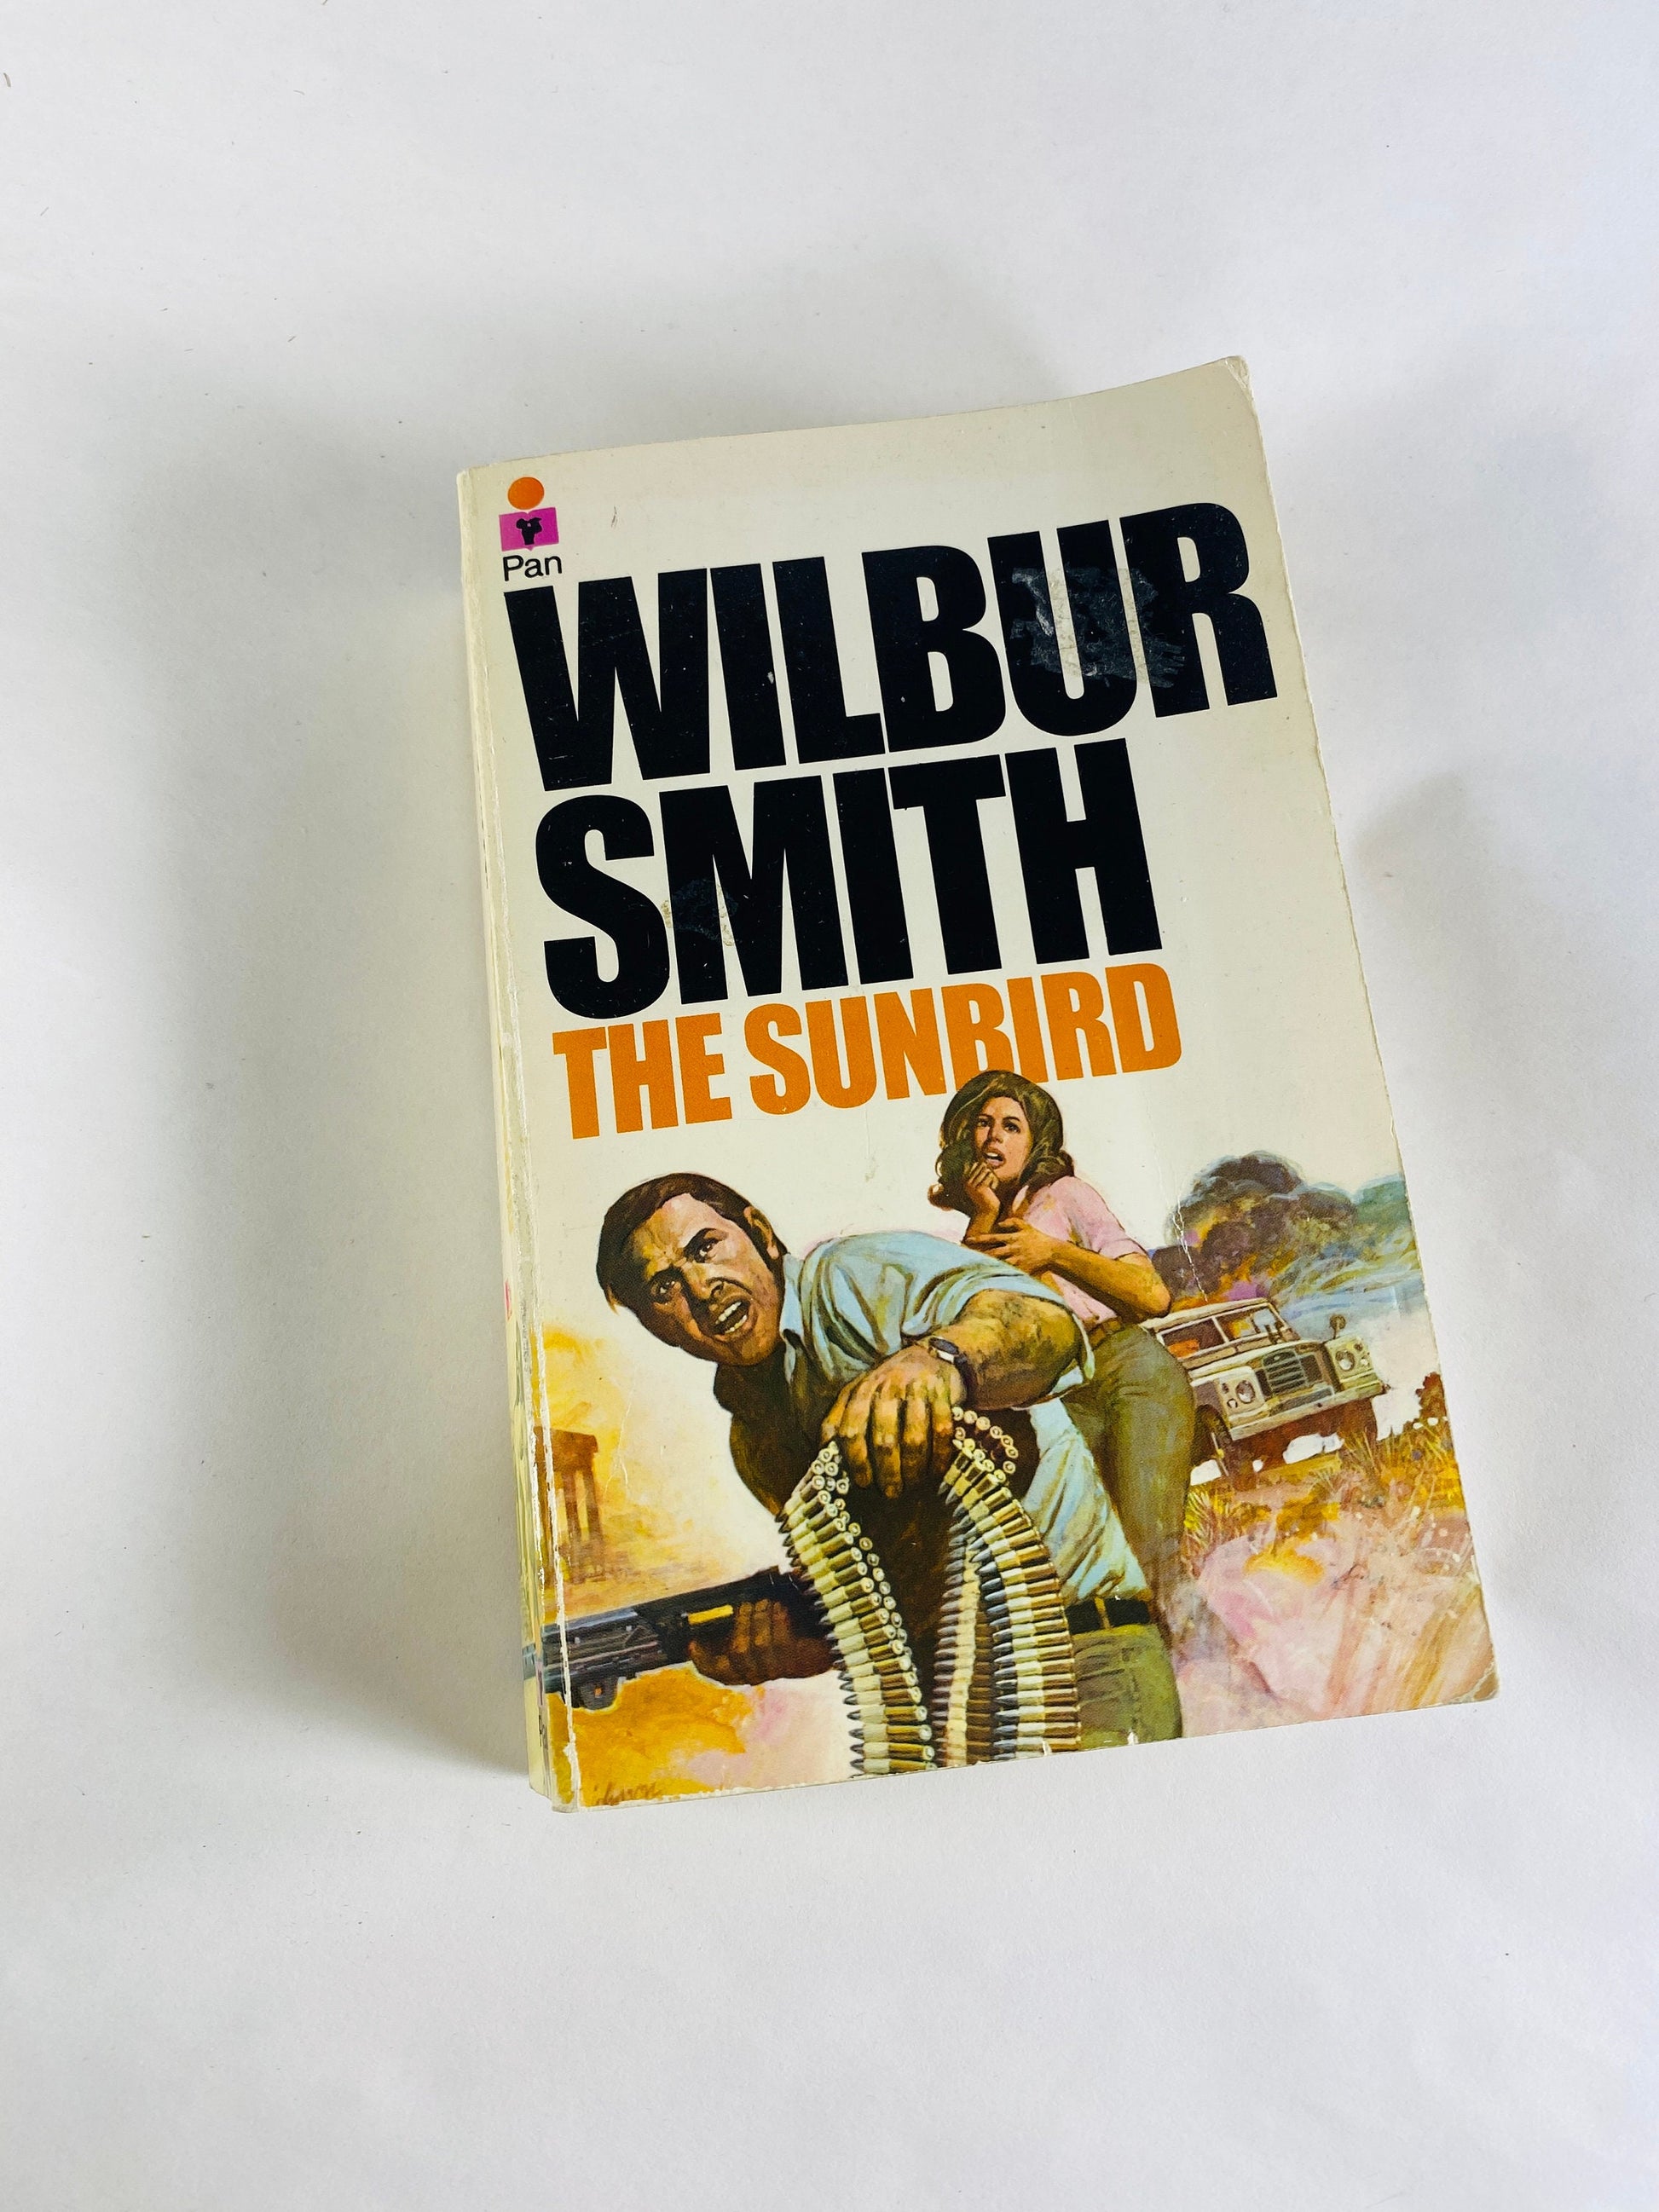 Sunbird vintage paperback book by Wilbur Smith circa 1974 by the author of When the Lion Feeds about adventure in modern Africa